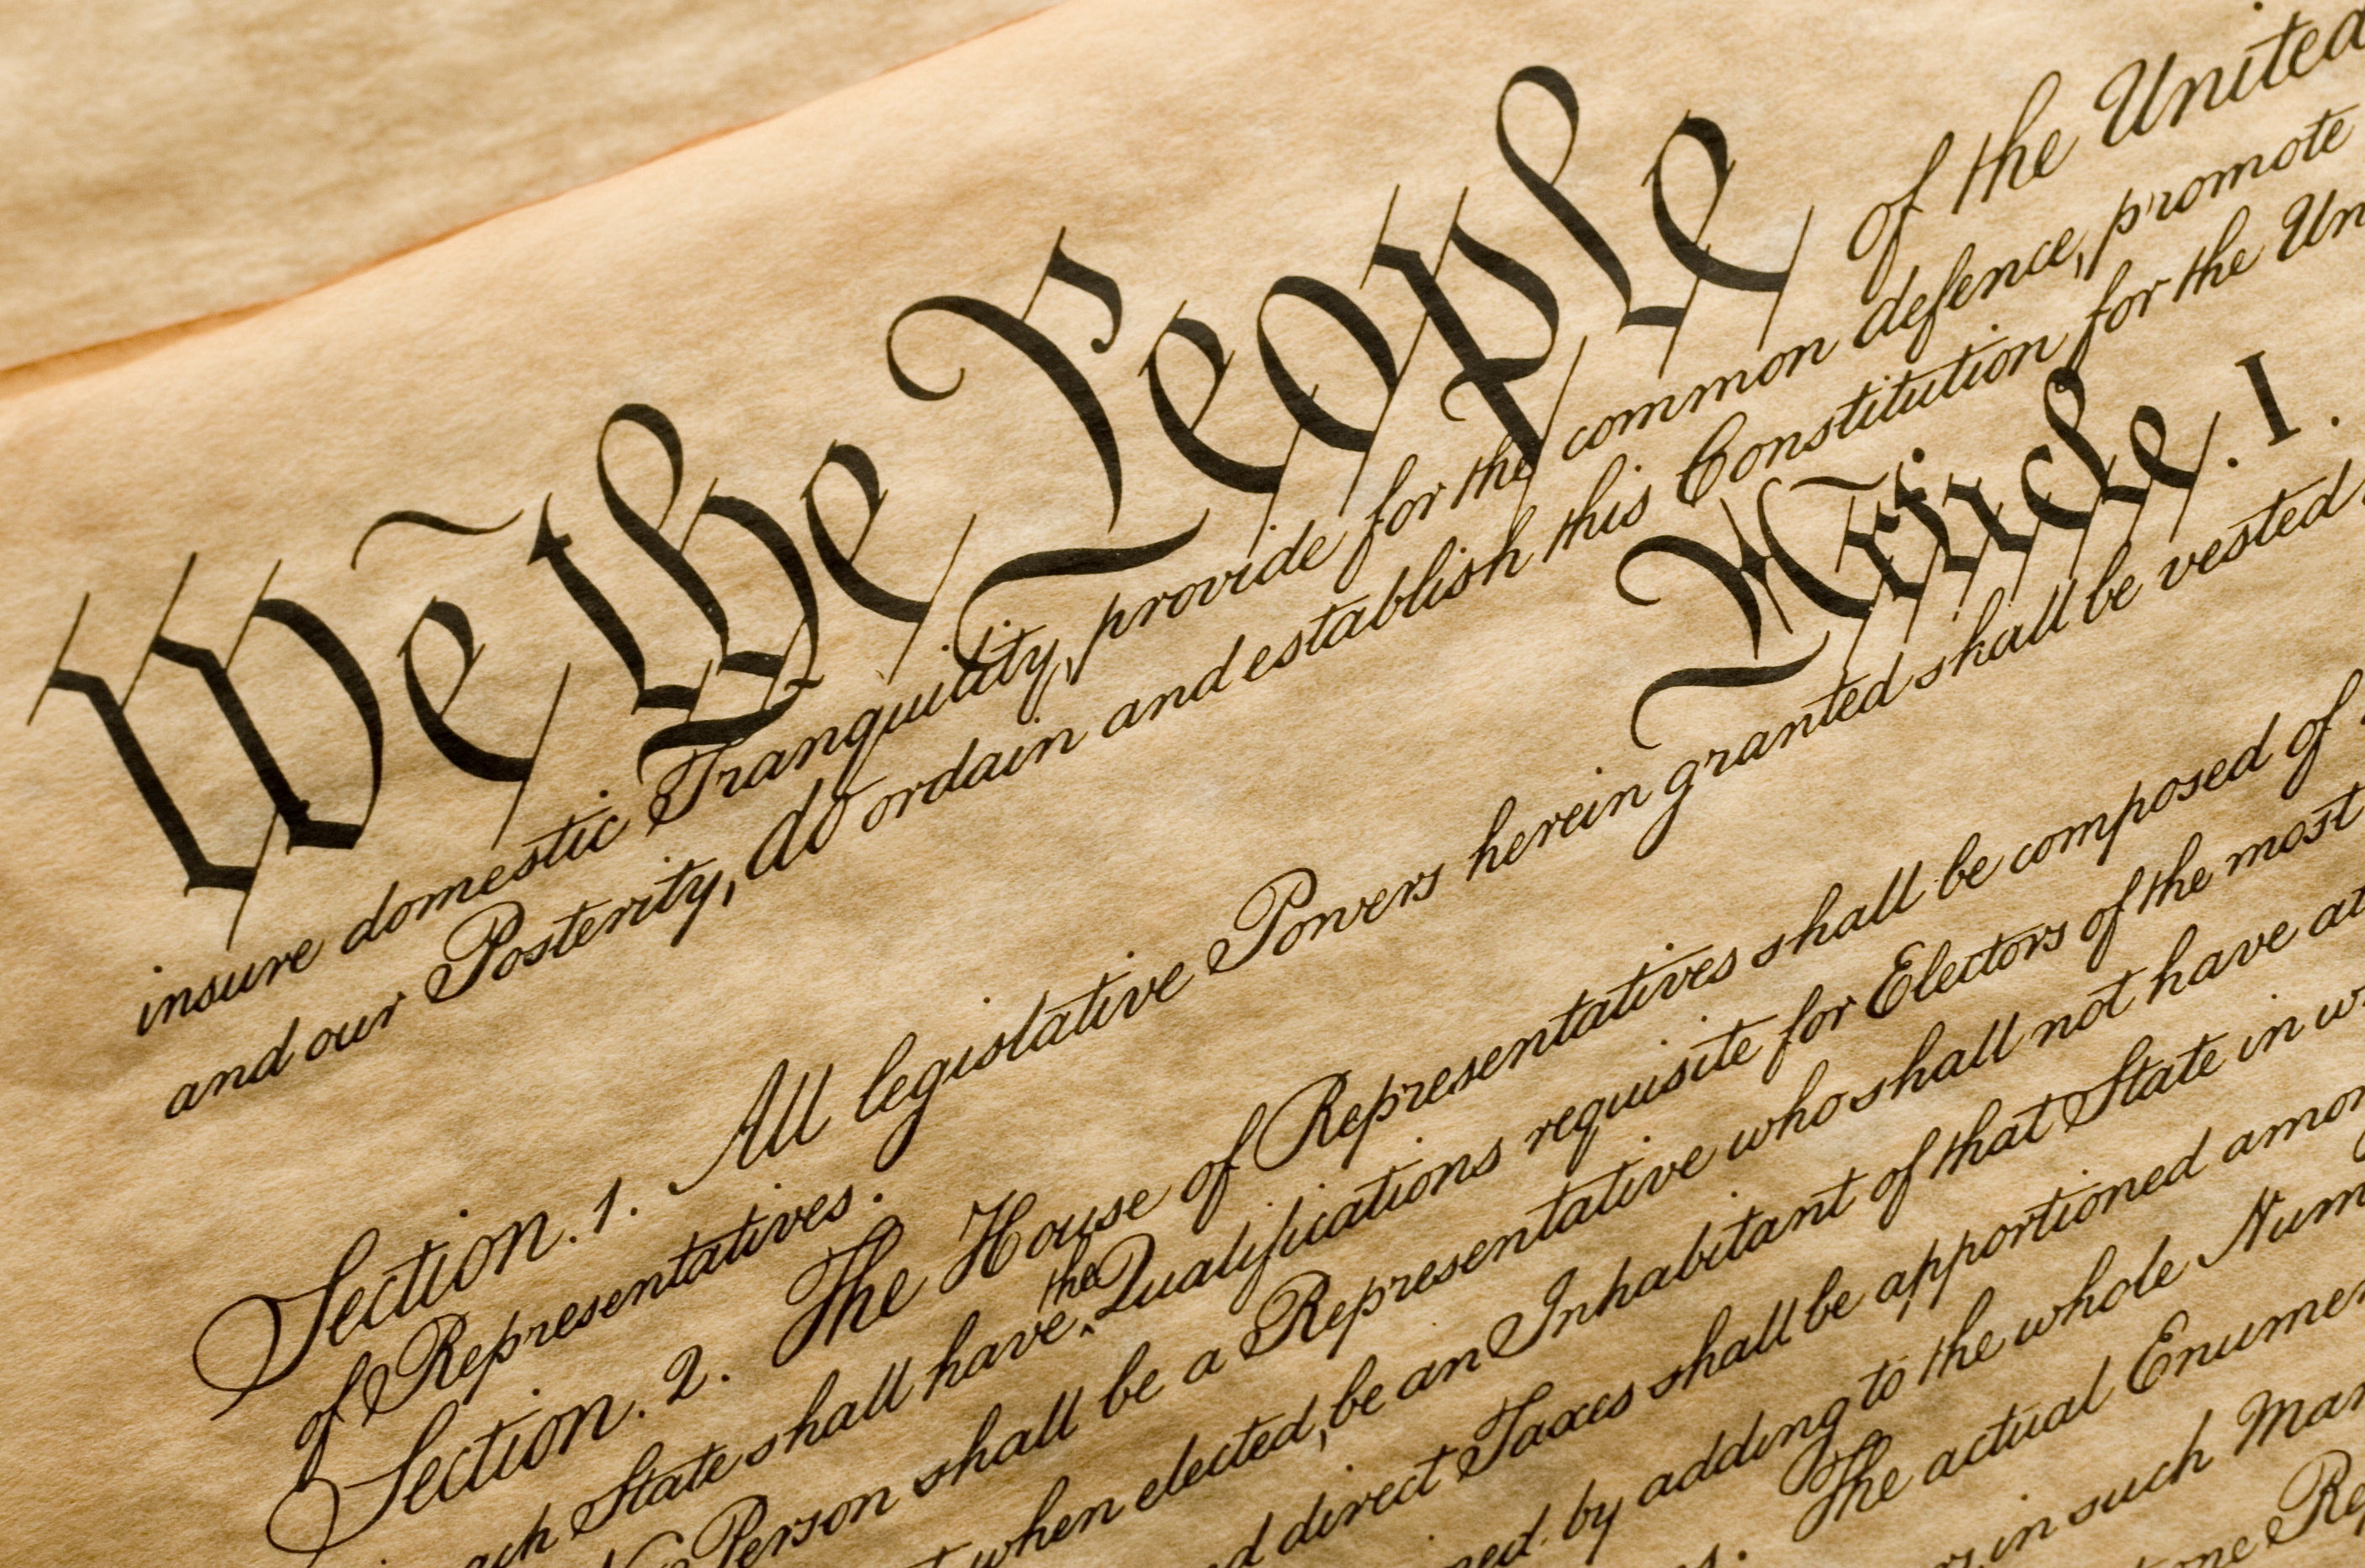 The US Constitution – Americans have much to learn from looking at how similar projects have been imagined